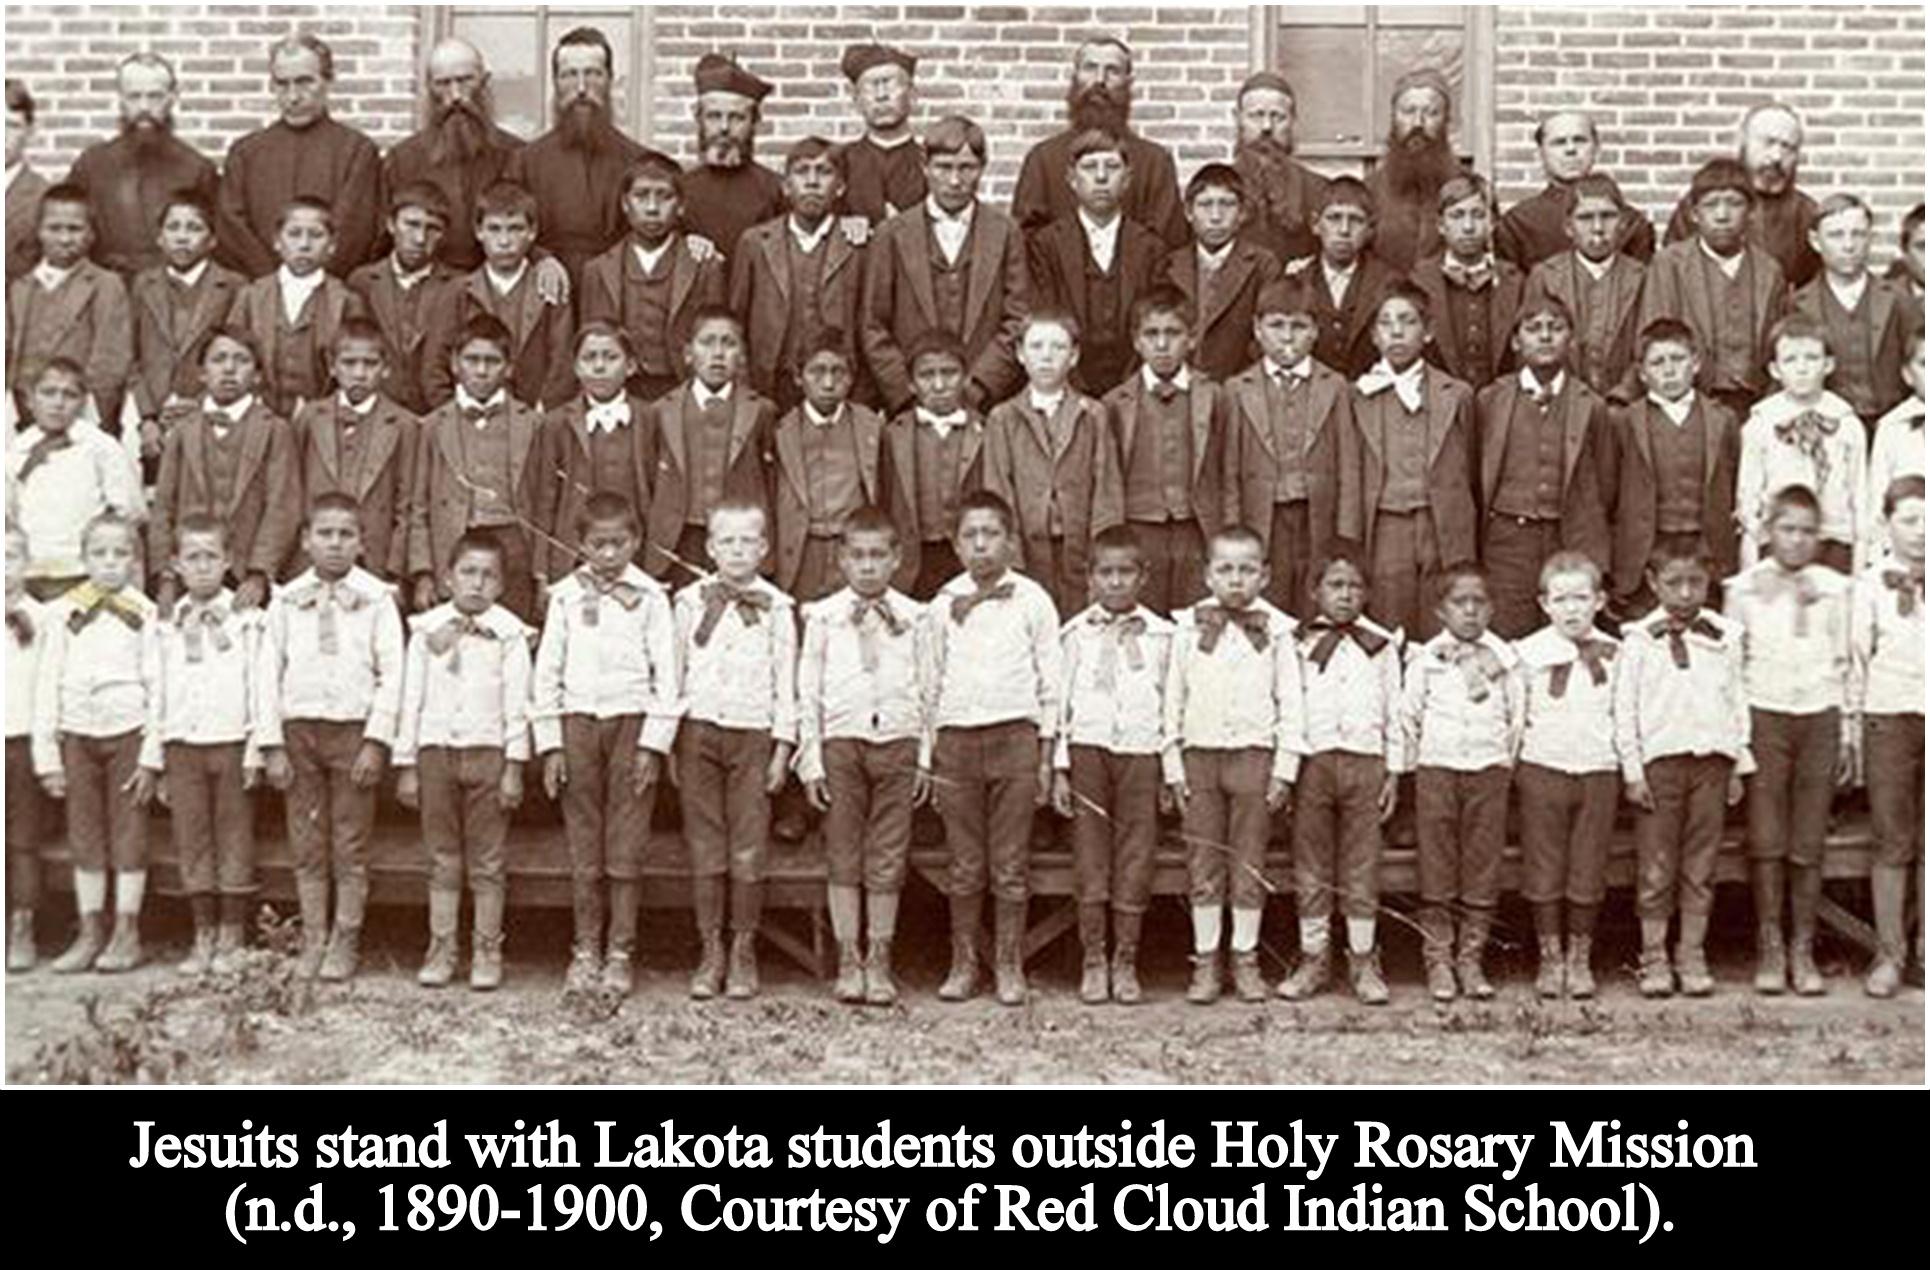 Archival photo - Jesuits stand with Lakota students outside Holy Rosary Mission. 